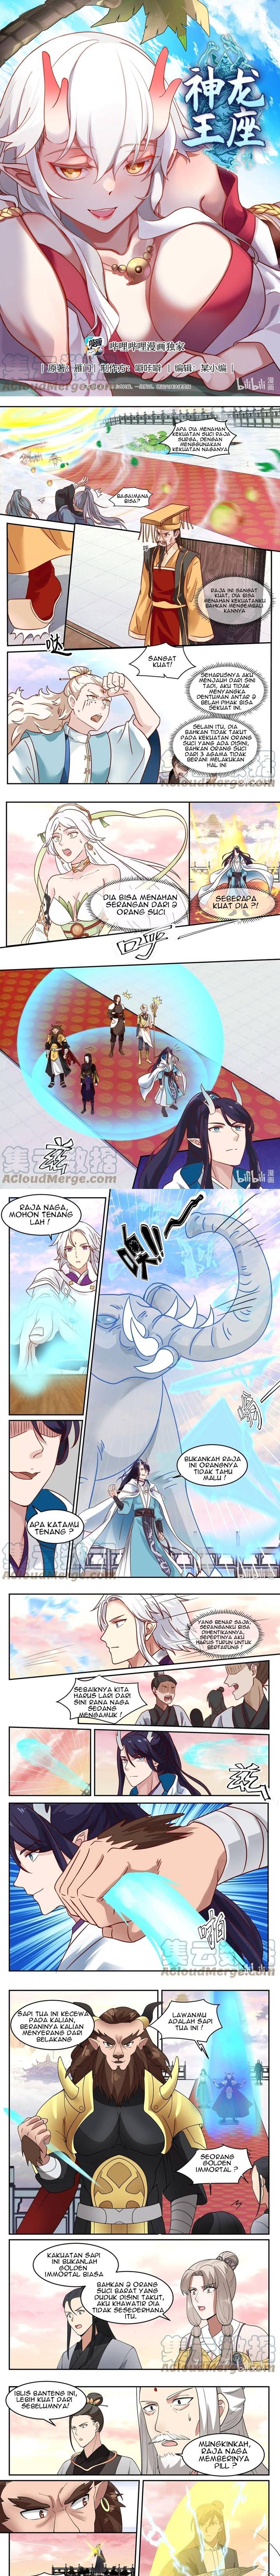 Dragon Throne Chapter 140